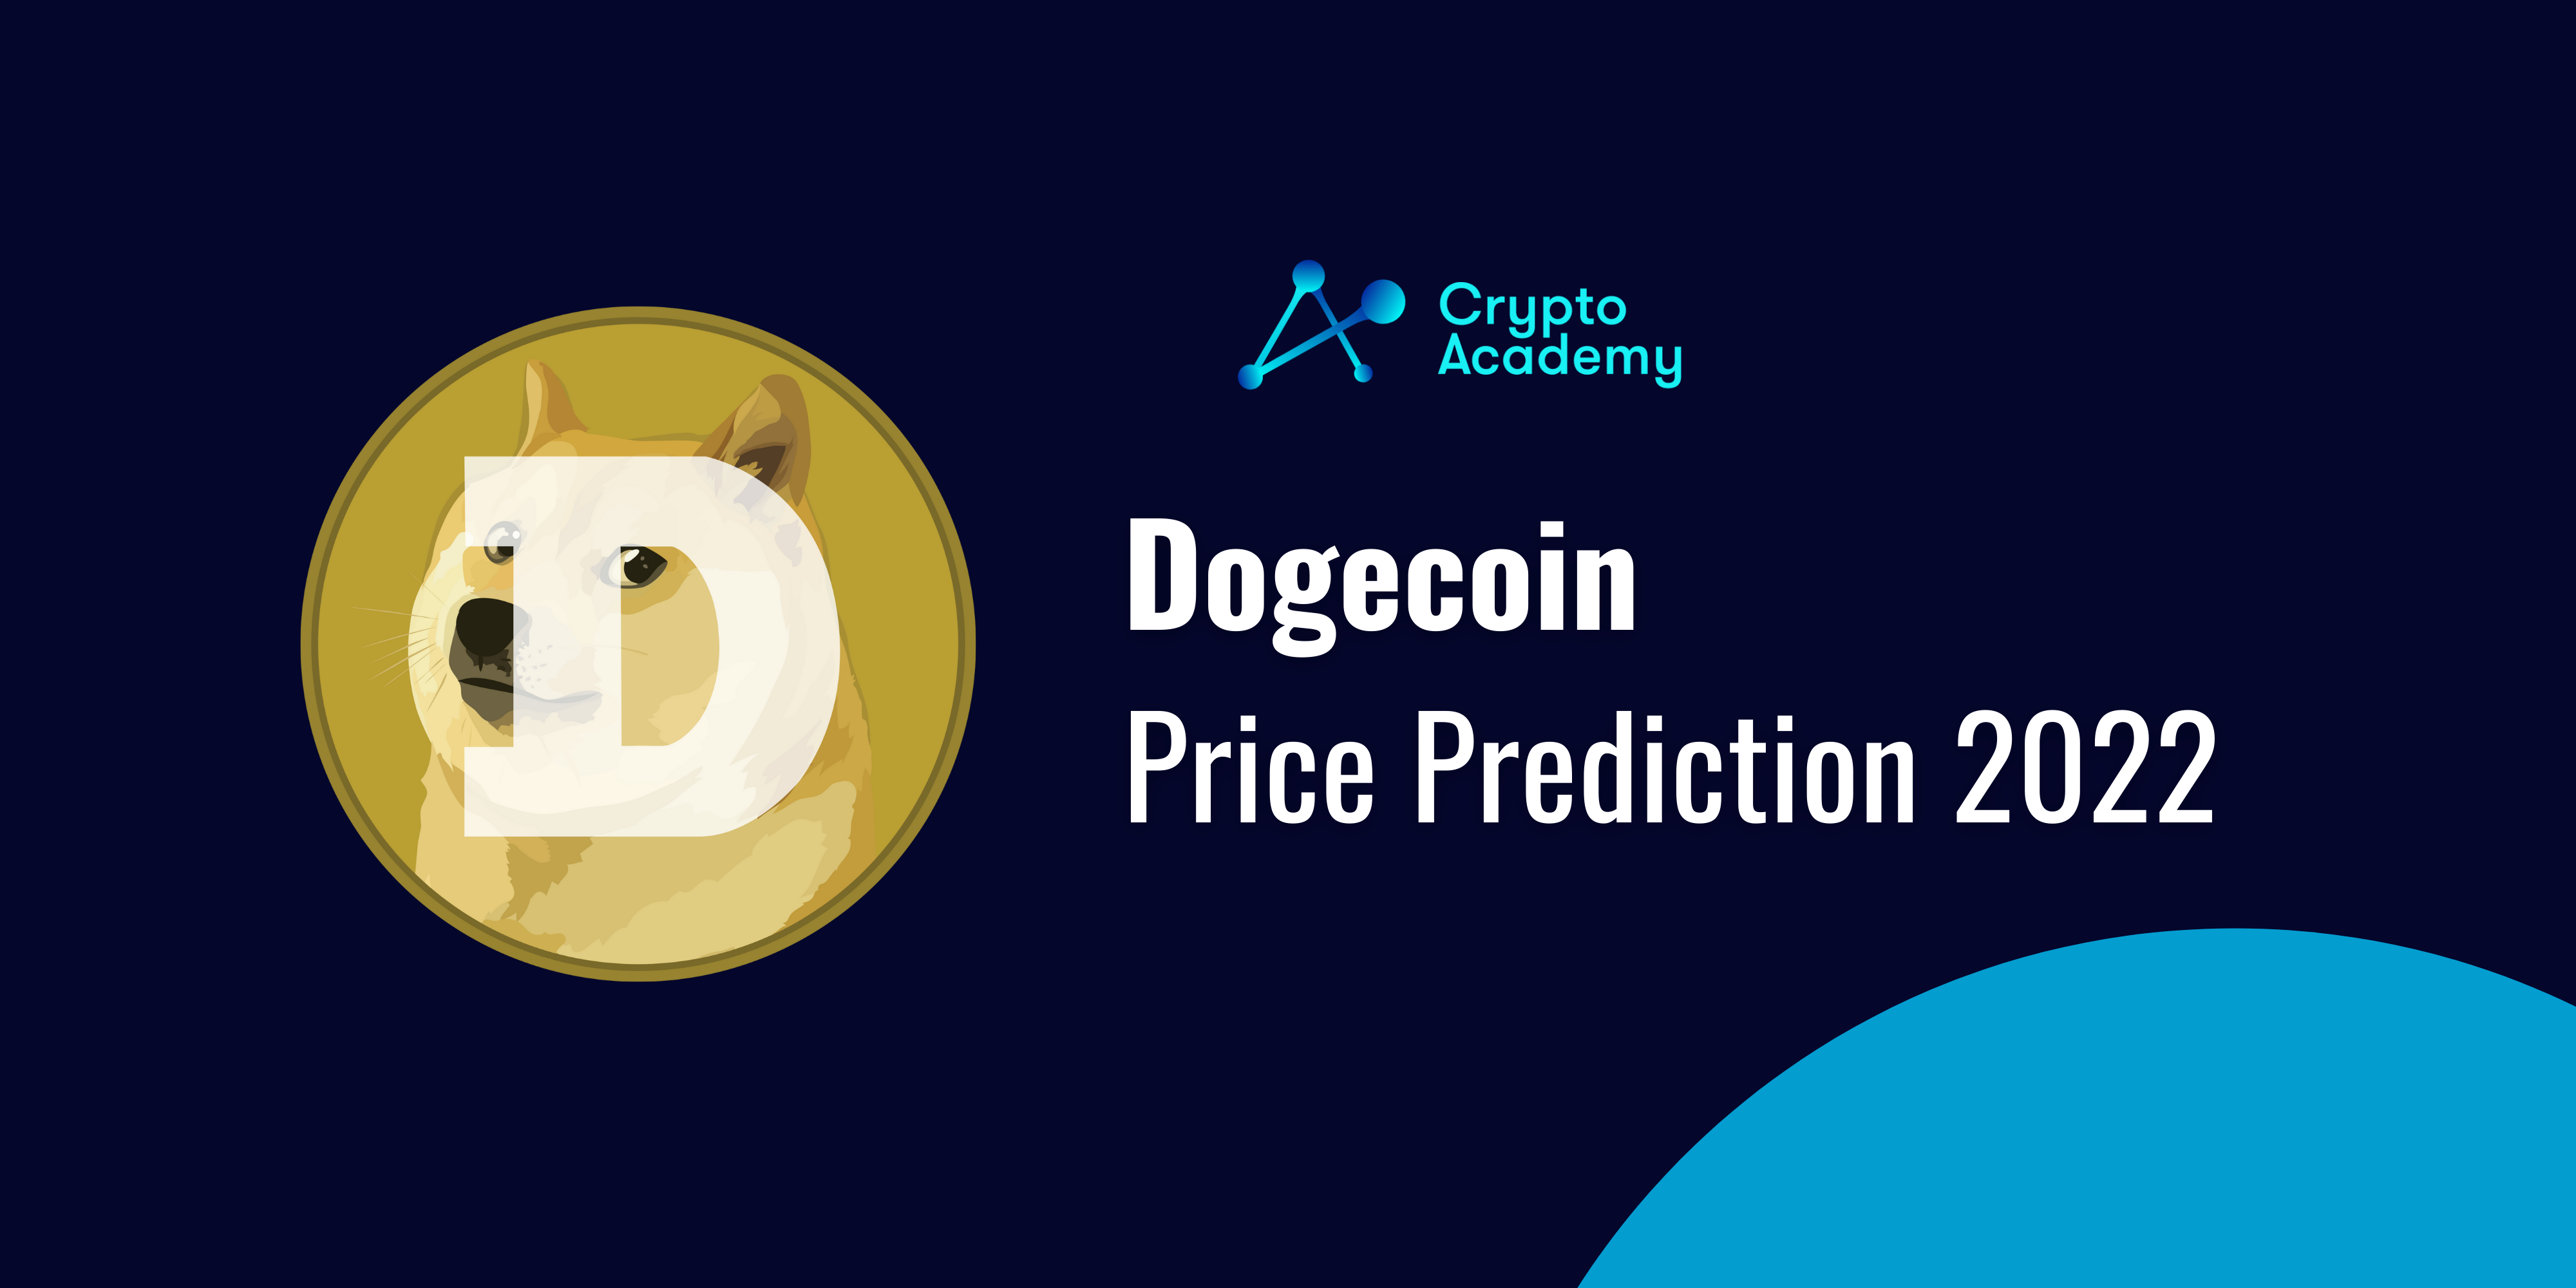 Dogecoin Price Prediction 2022 - What Will the Dogecoin Price be in 2022 and in Next Years to Come?